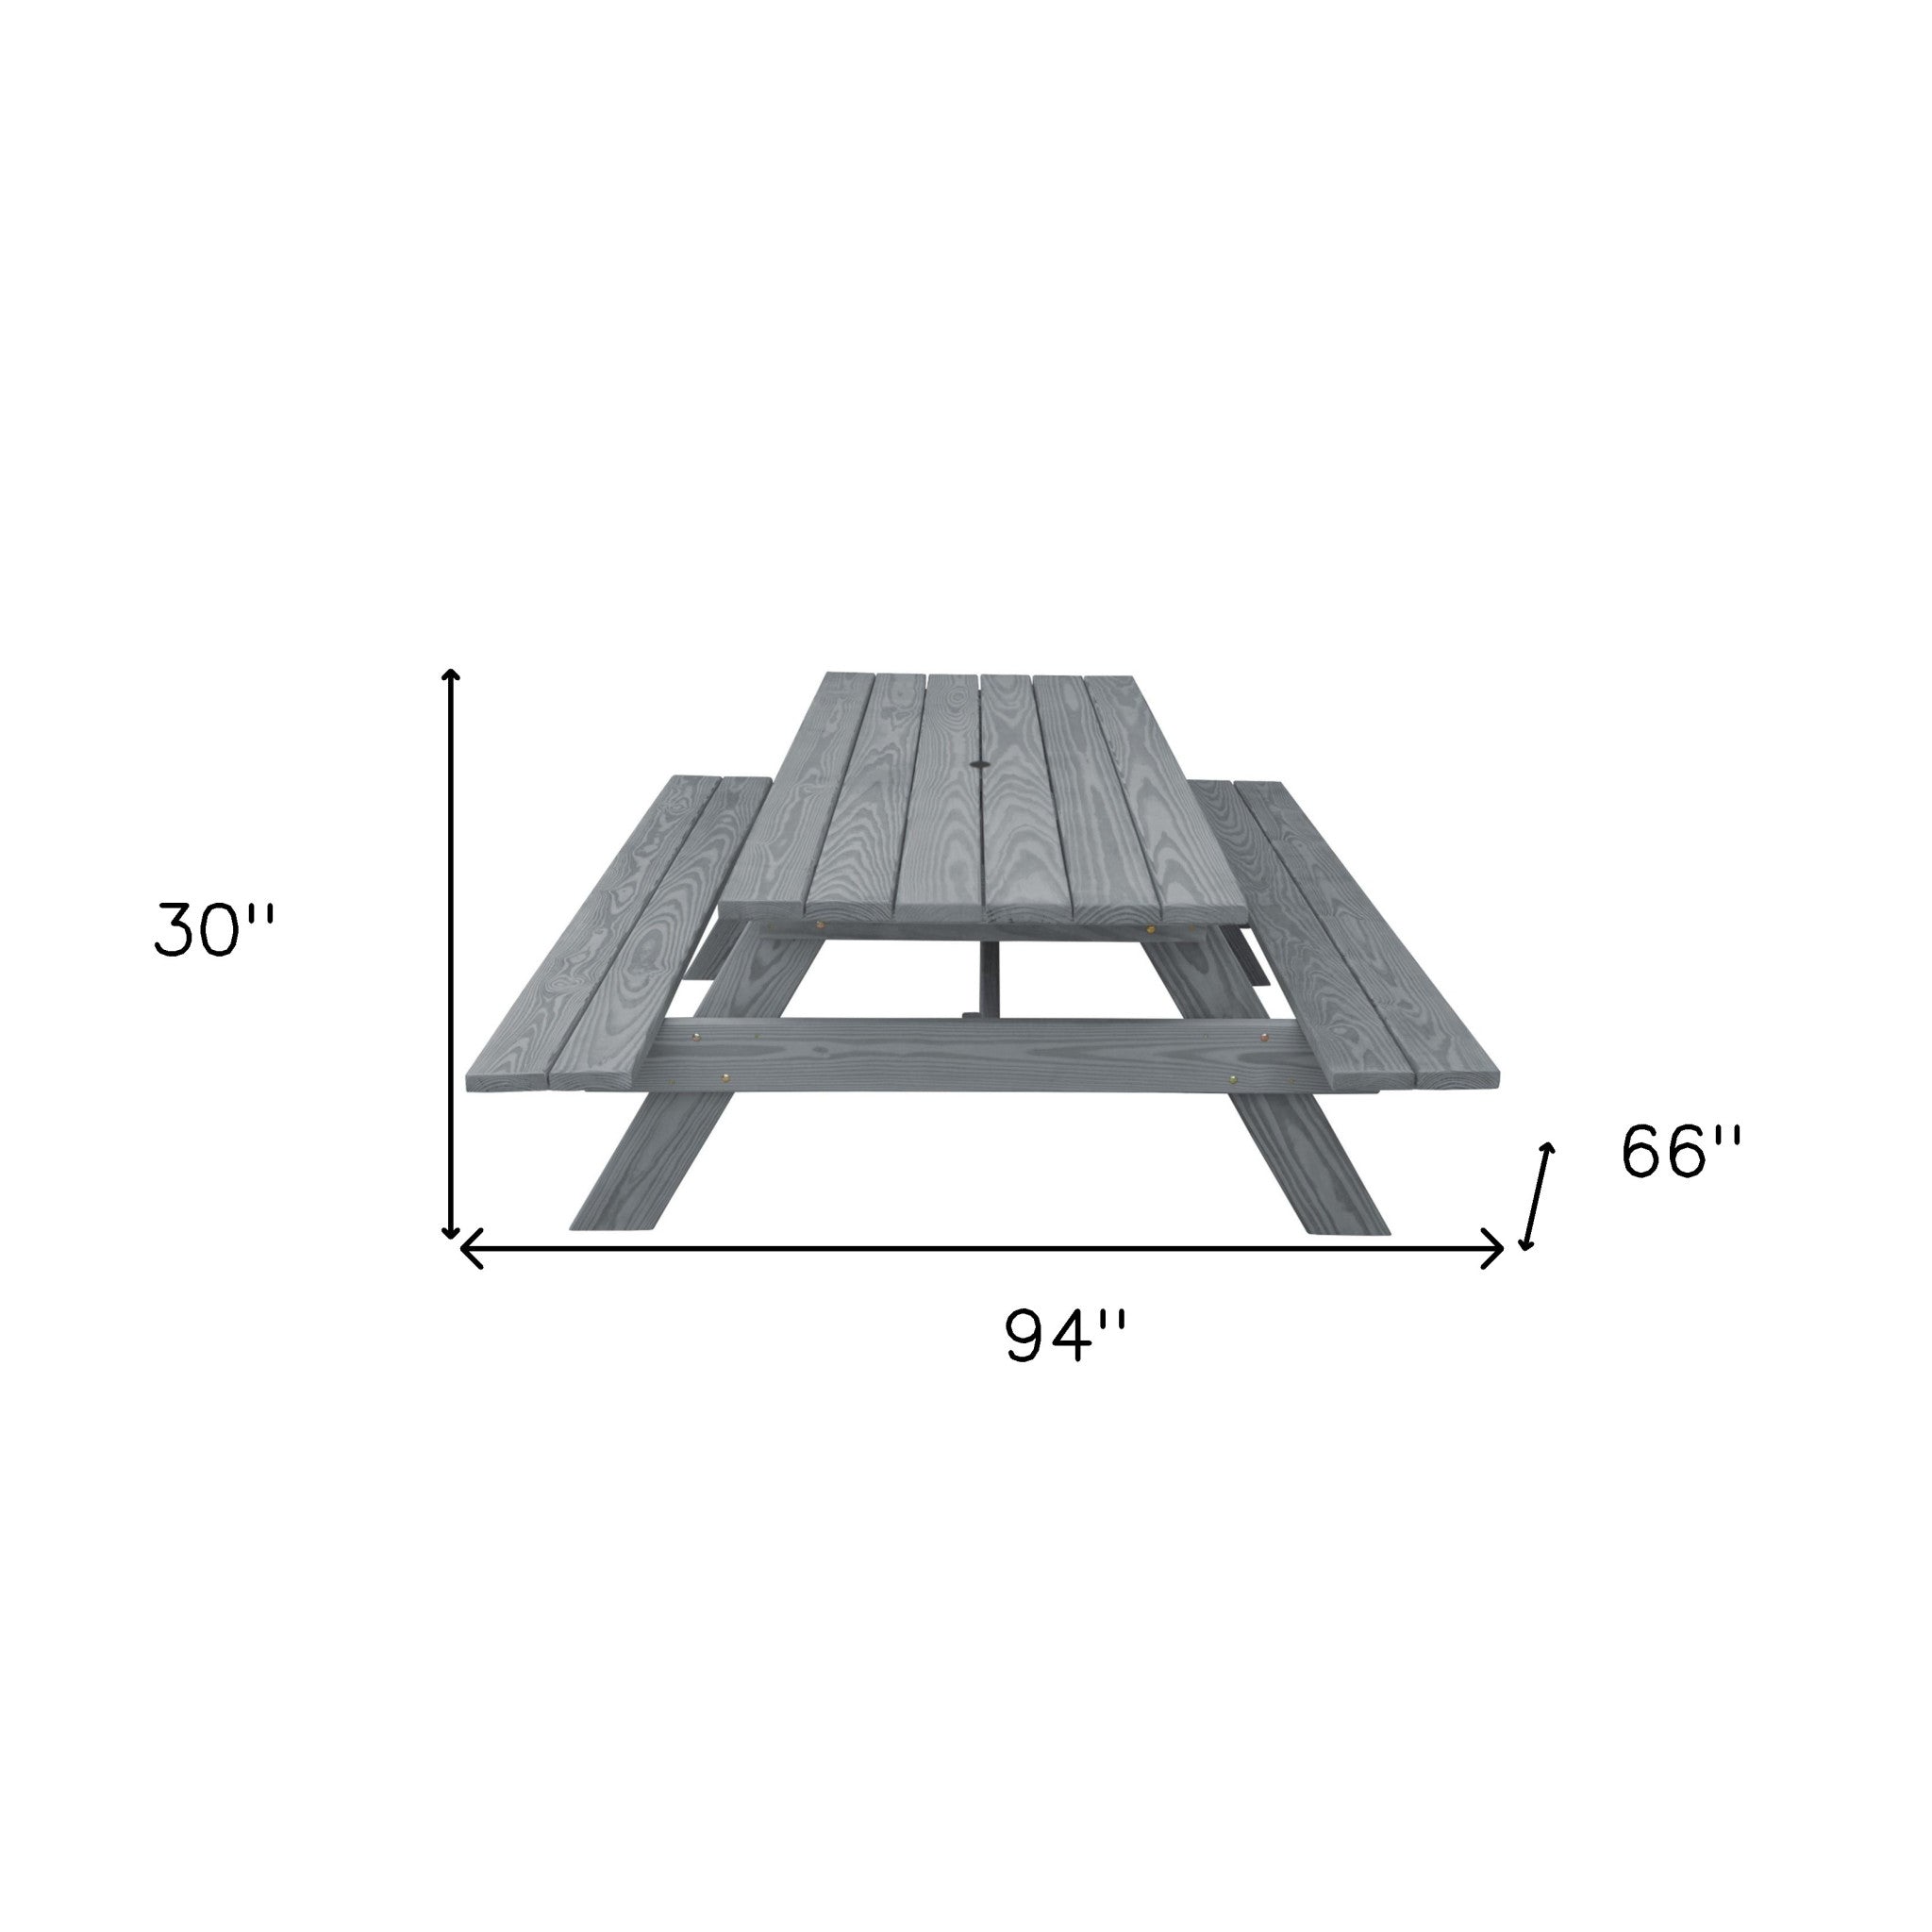 94" Gray Solid Wood Outdoor Picnic Table with Umbrella Hole